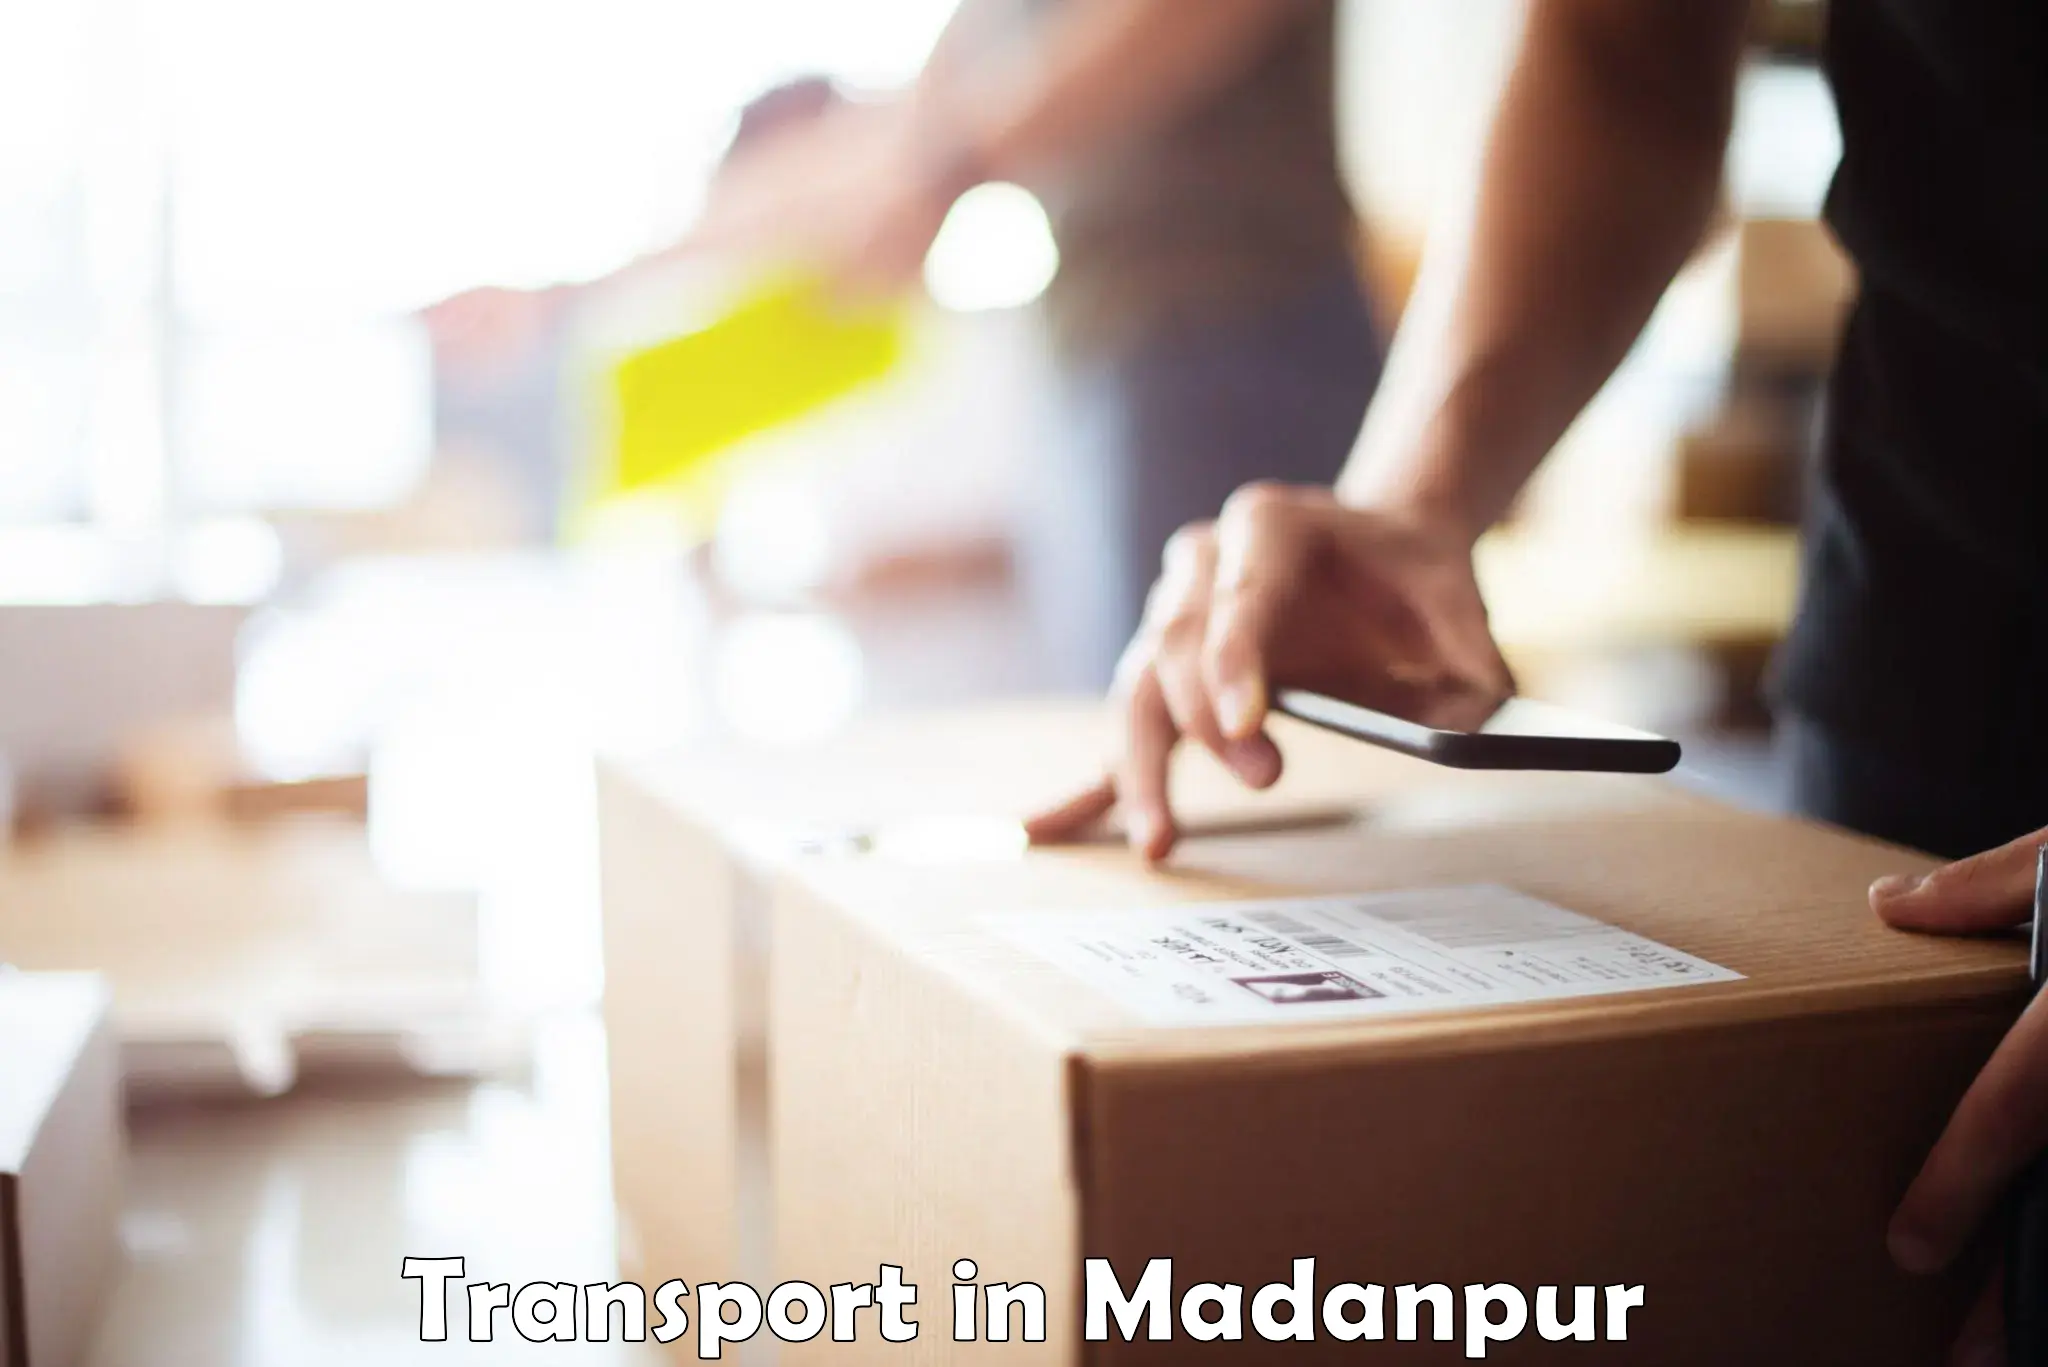 Daily transport service in Madanpur